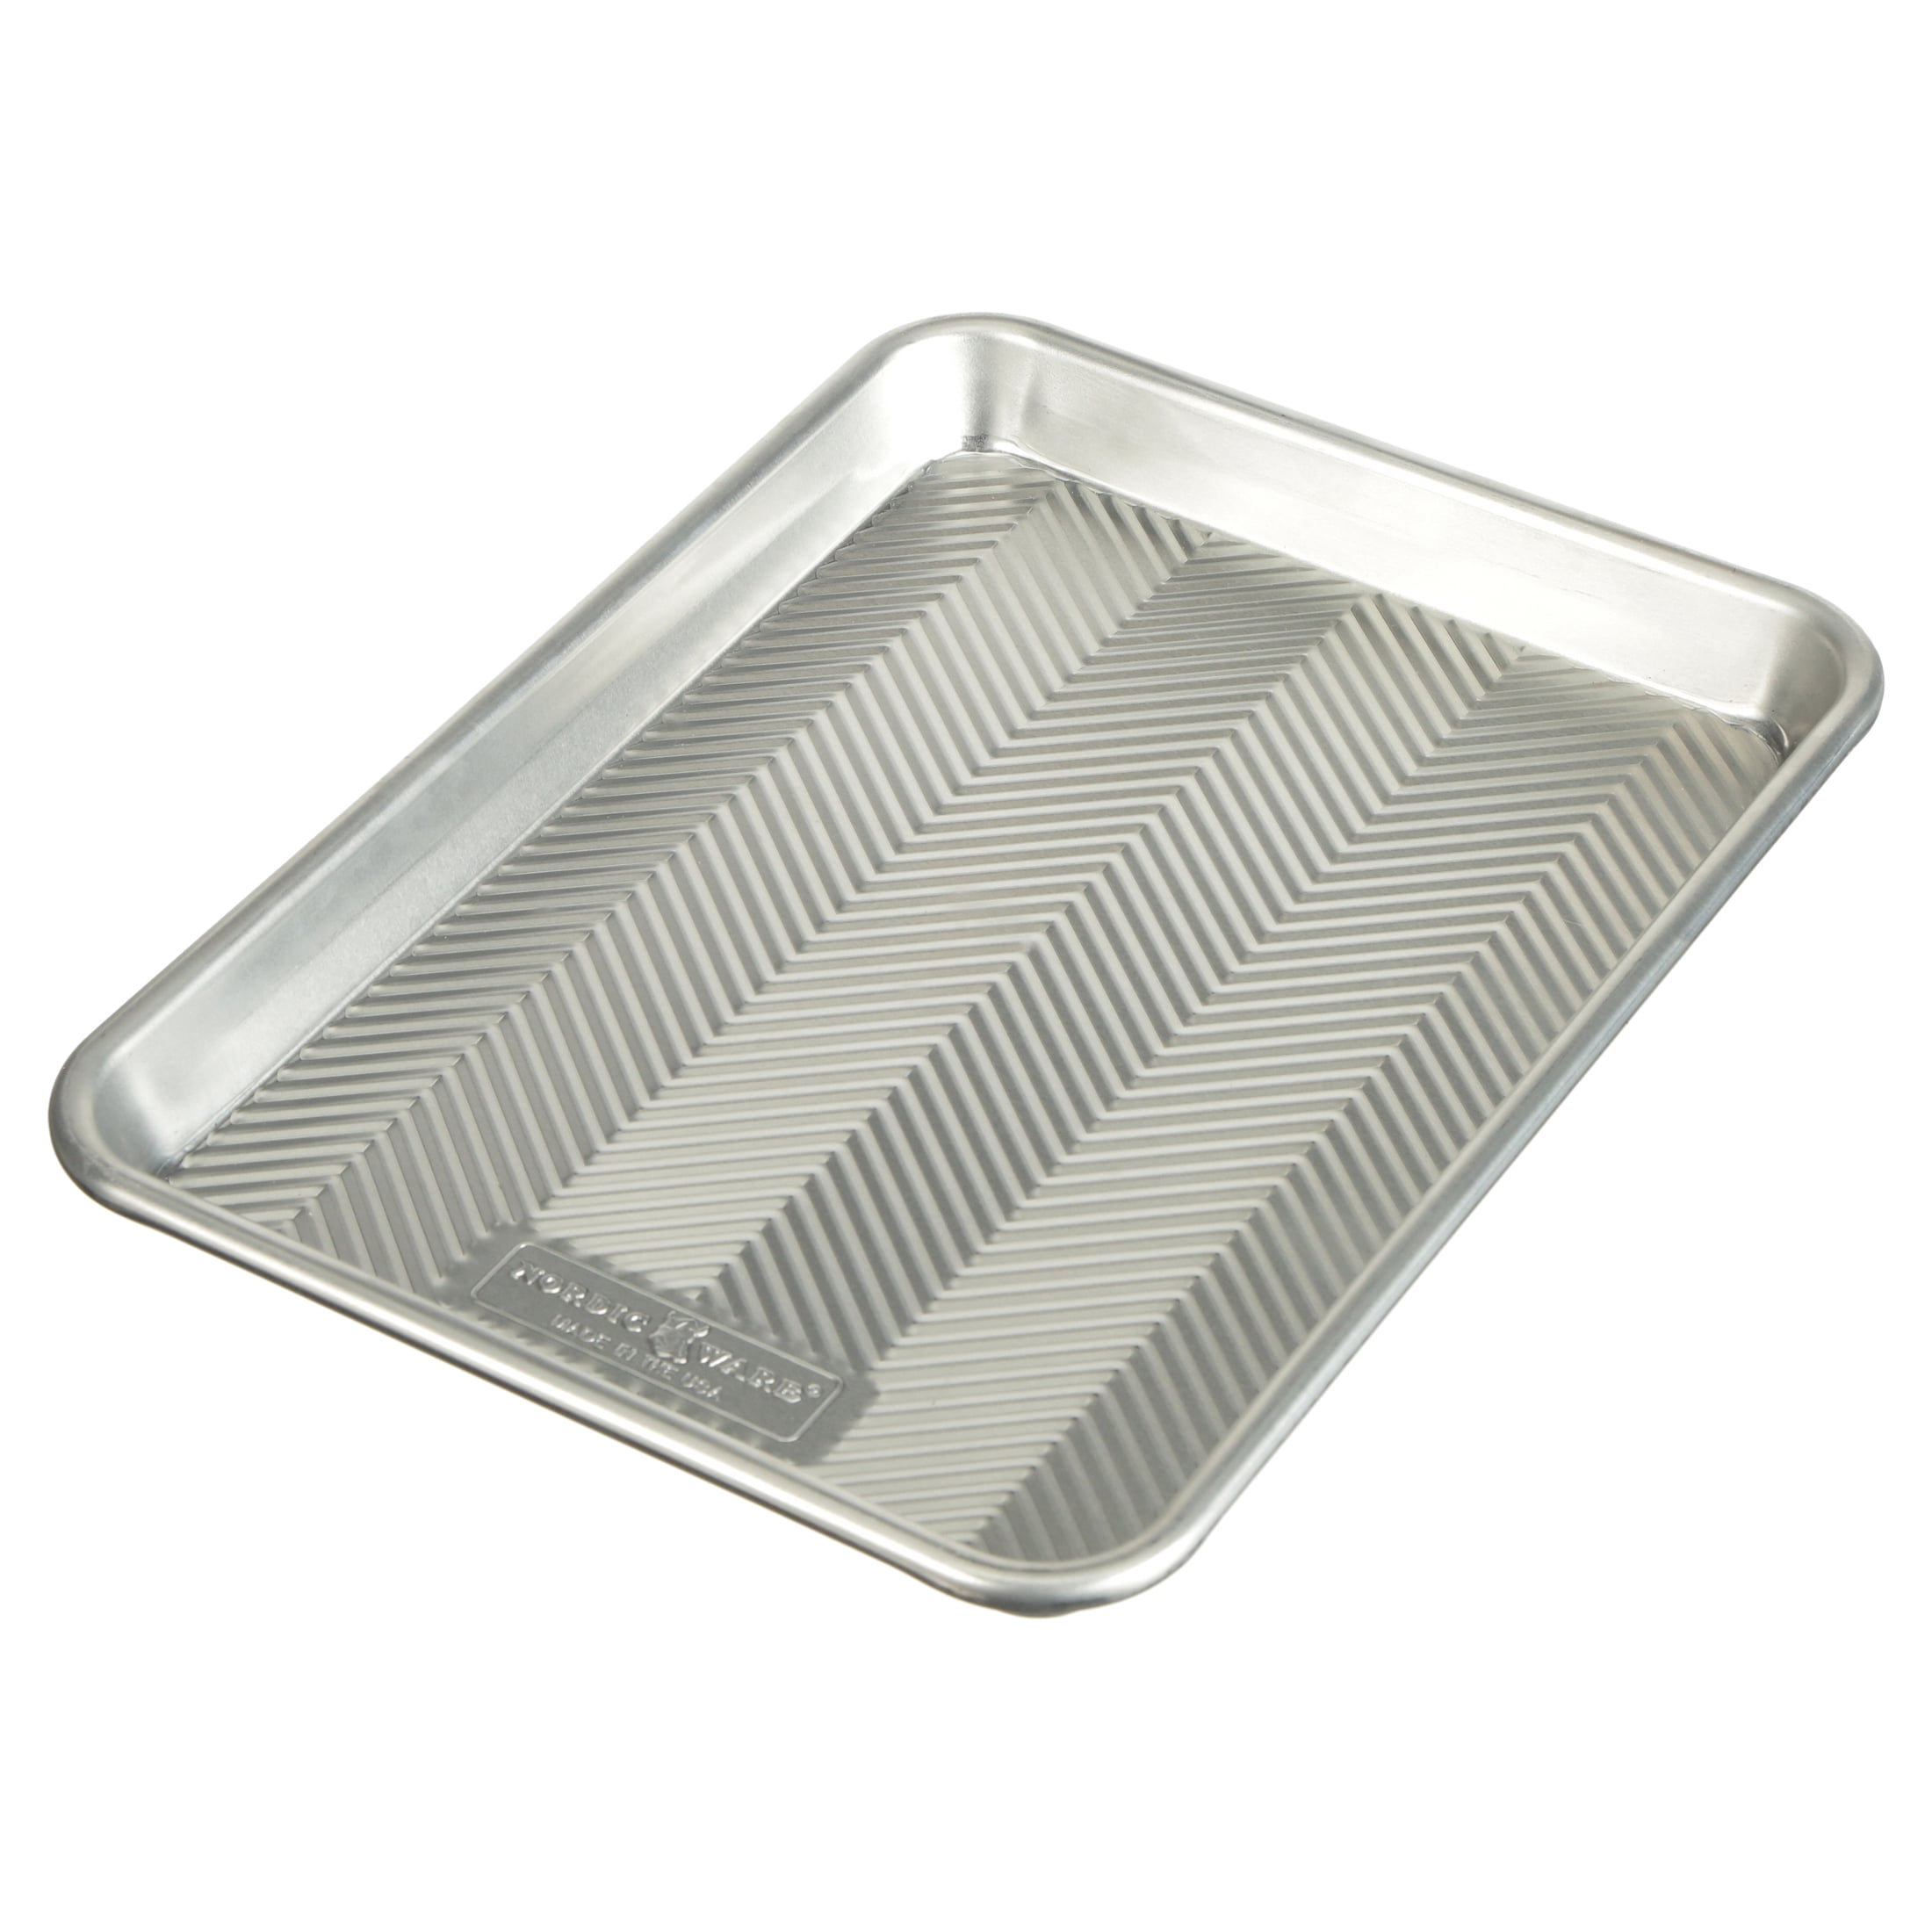 Nordic Ware Prism 12 x 17 High Sided Pan - 9273281